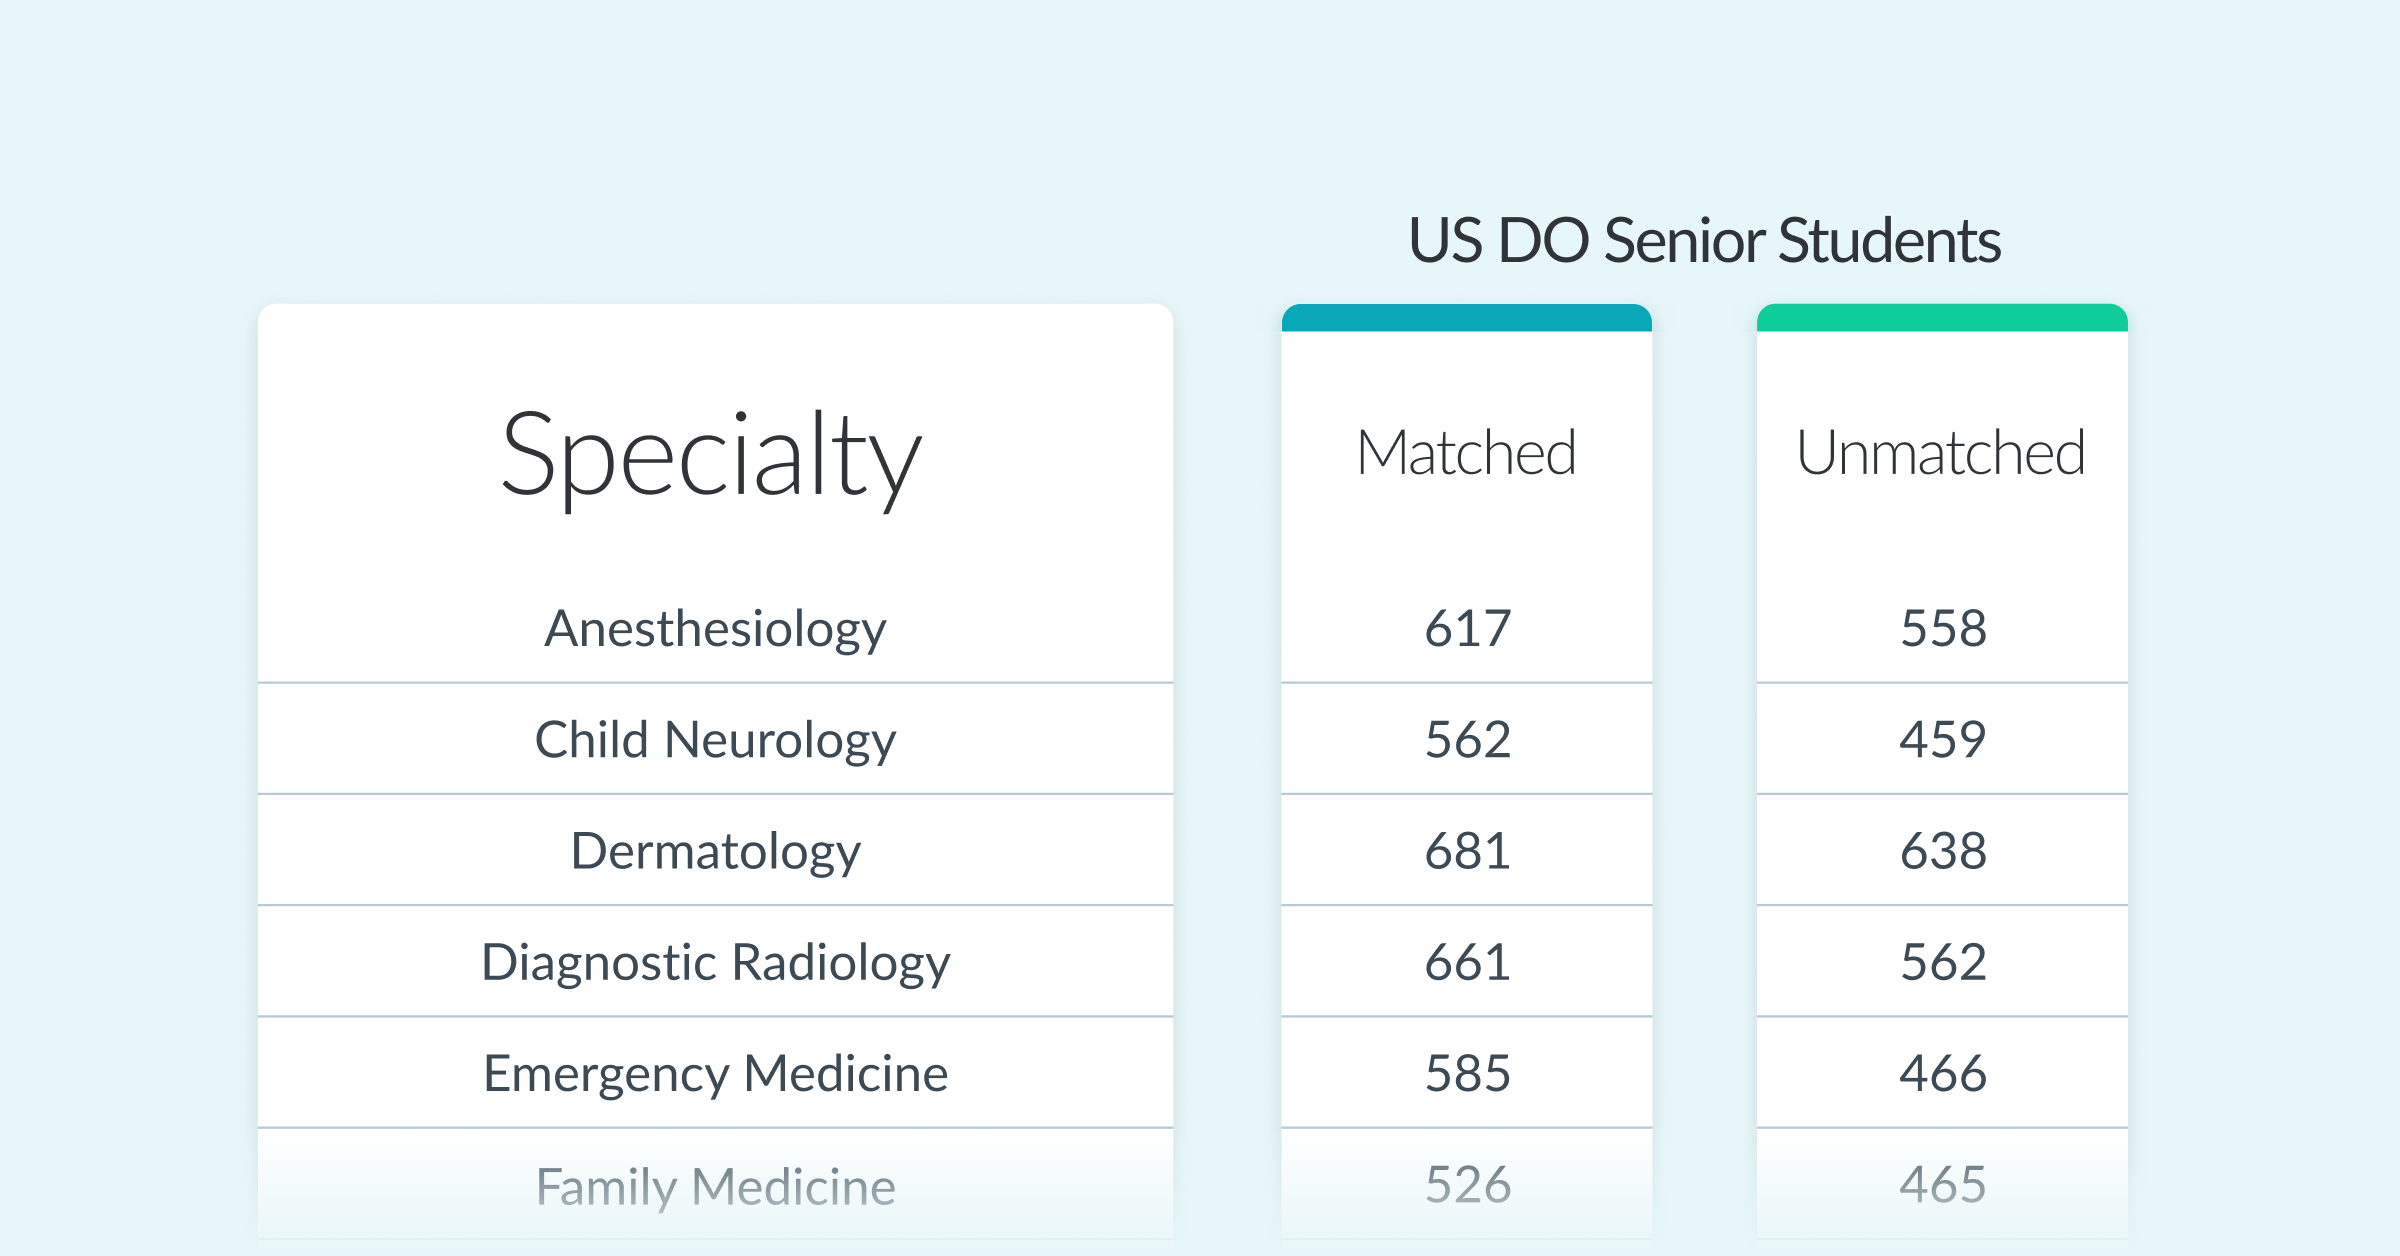 average-comlex-match-scores-by-medical-specialty-2022